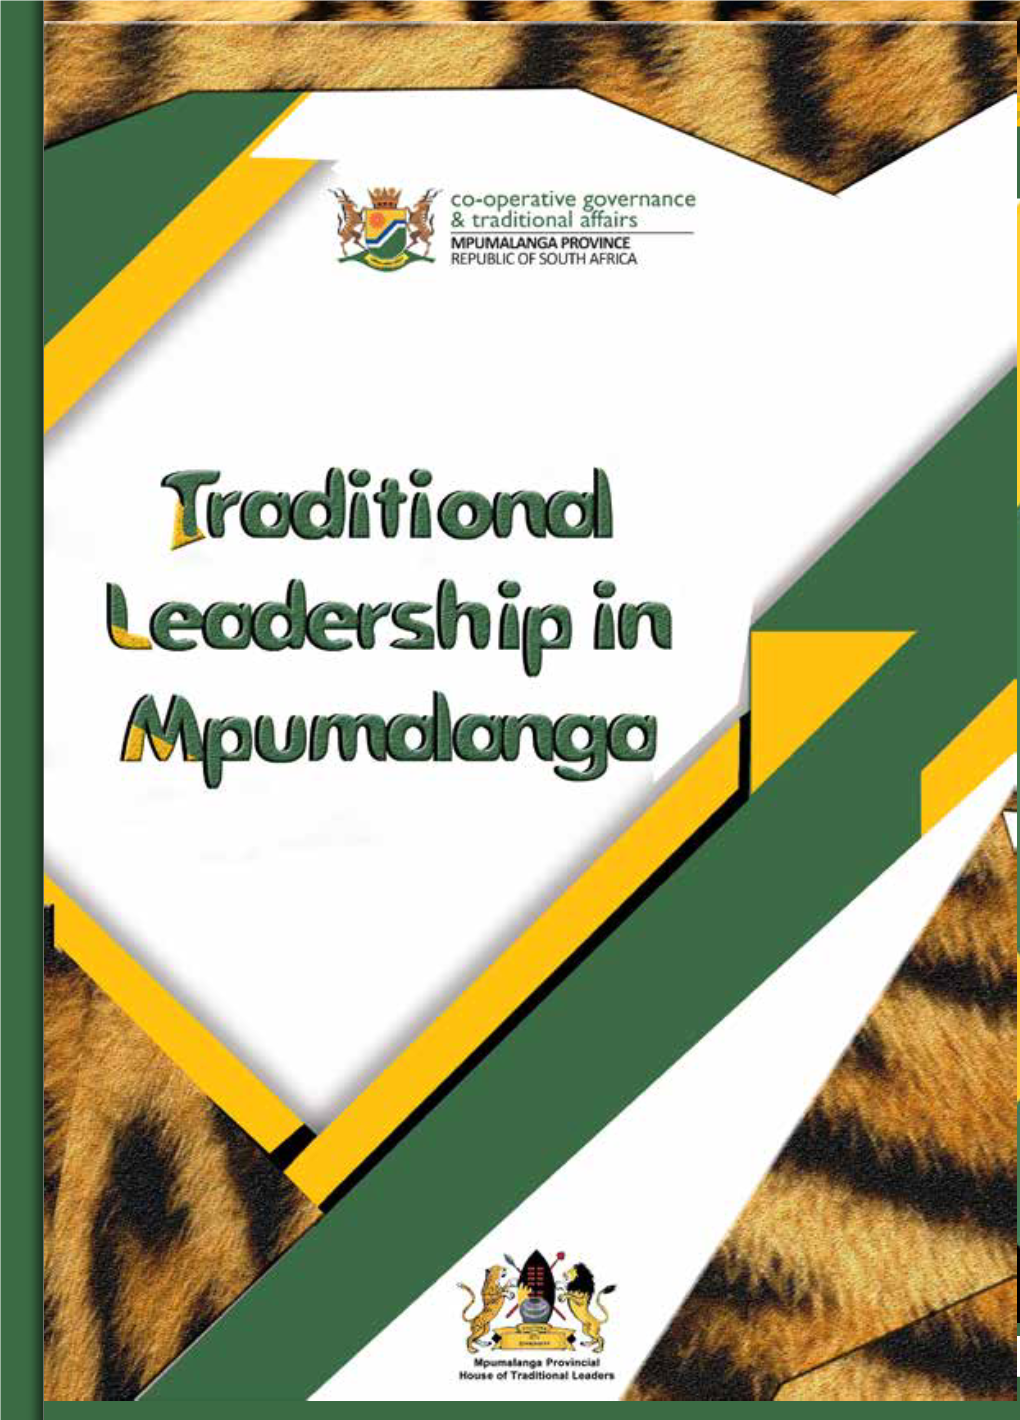 House of Traditional Leaders Booklet